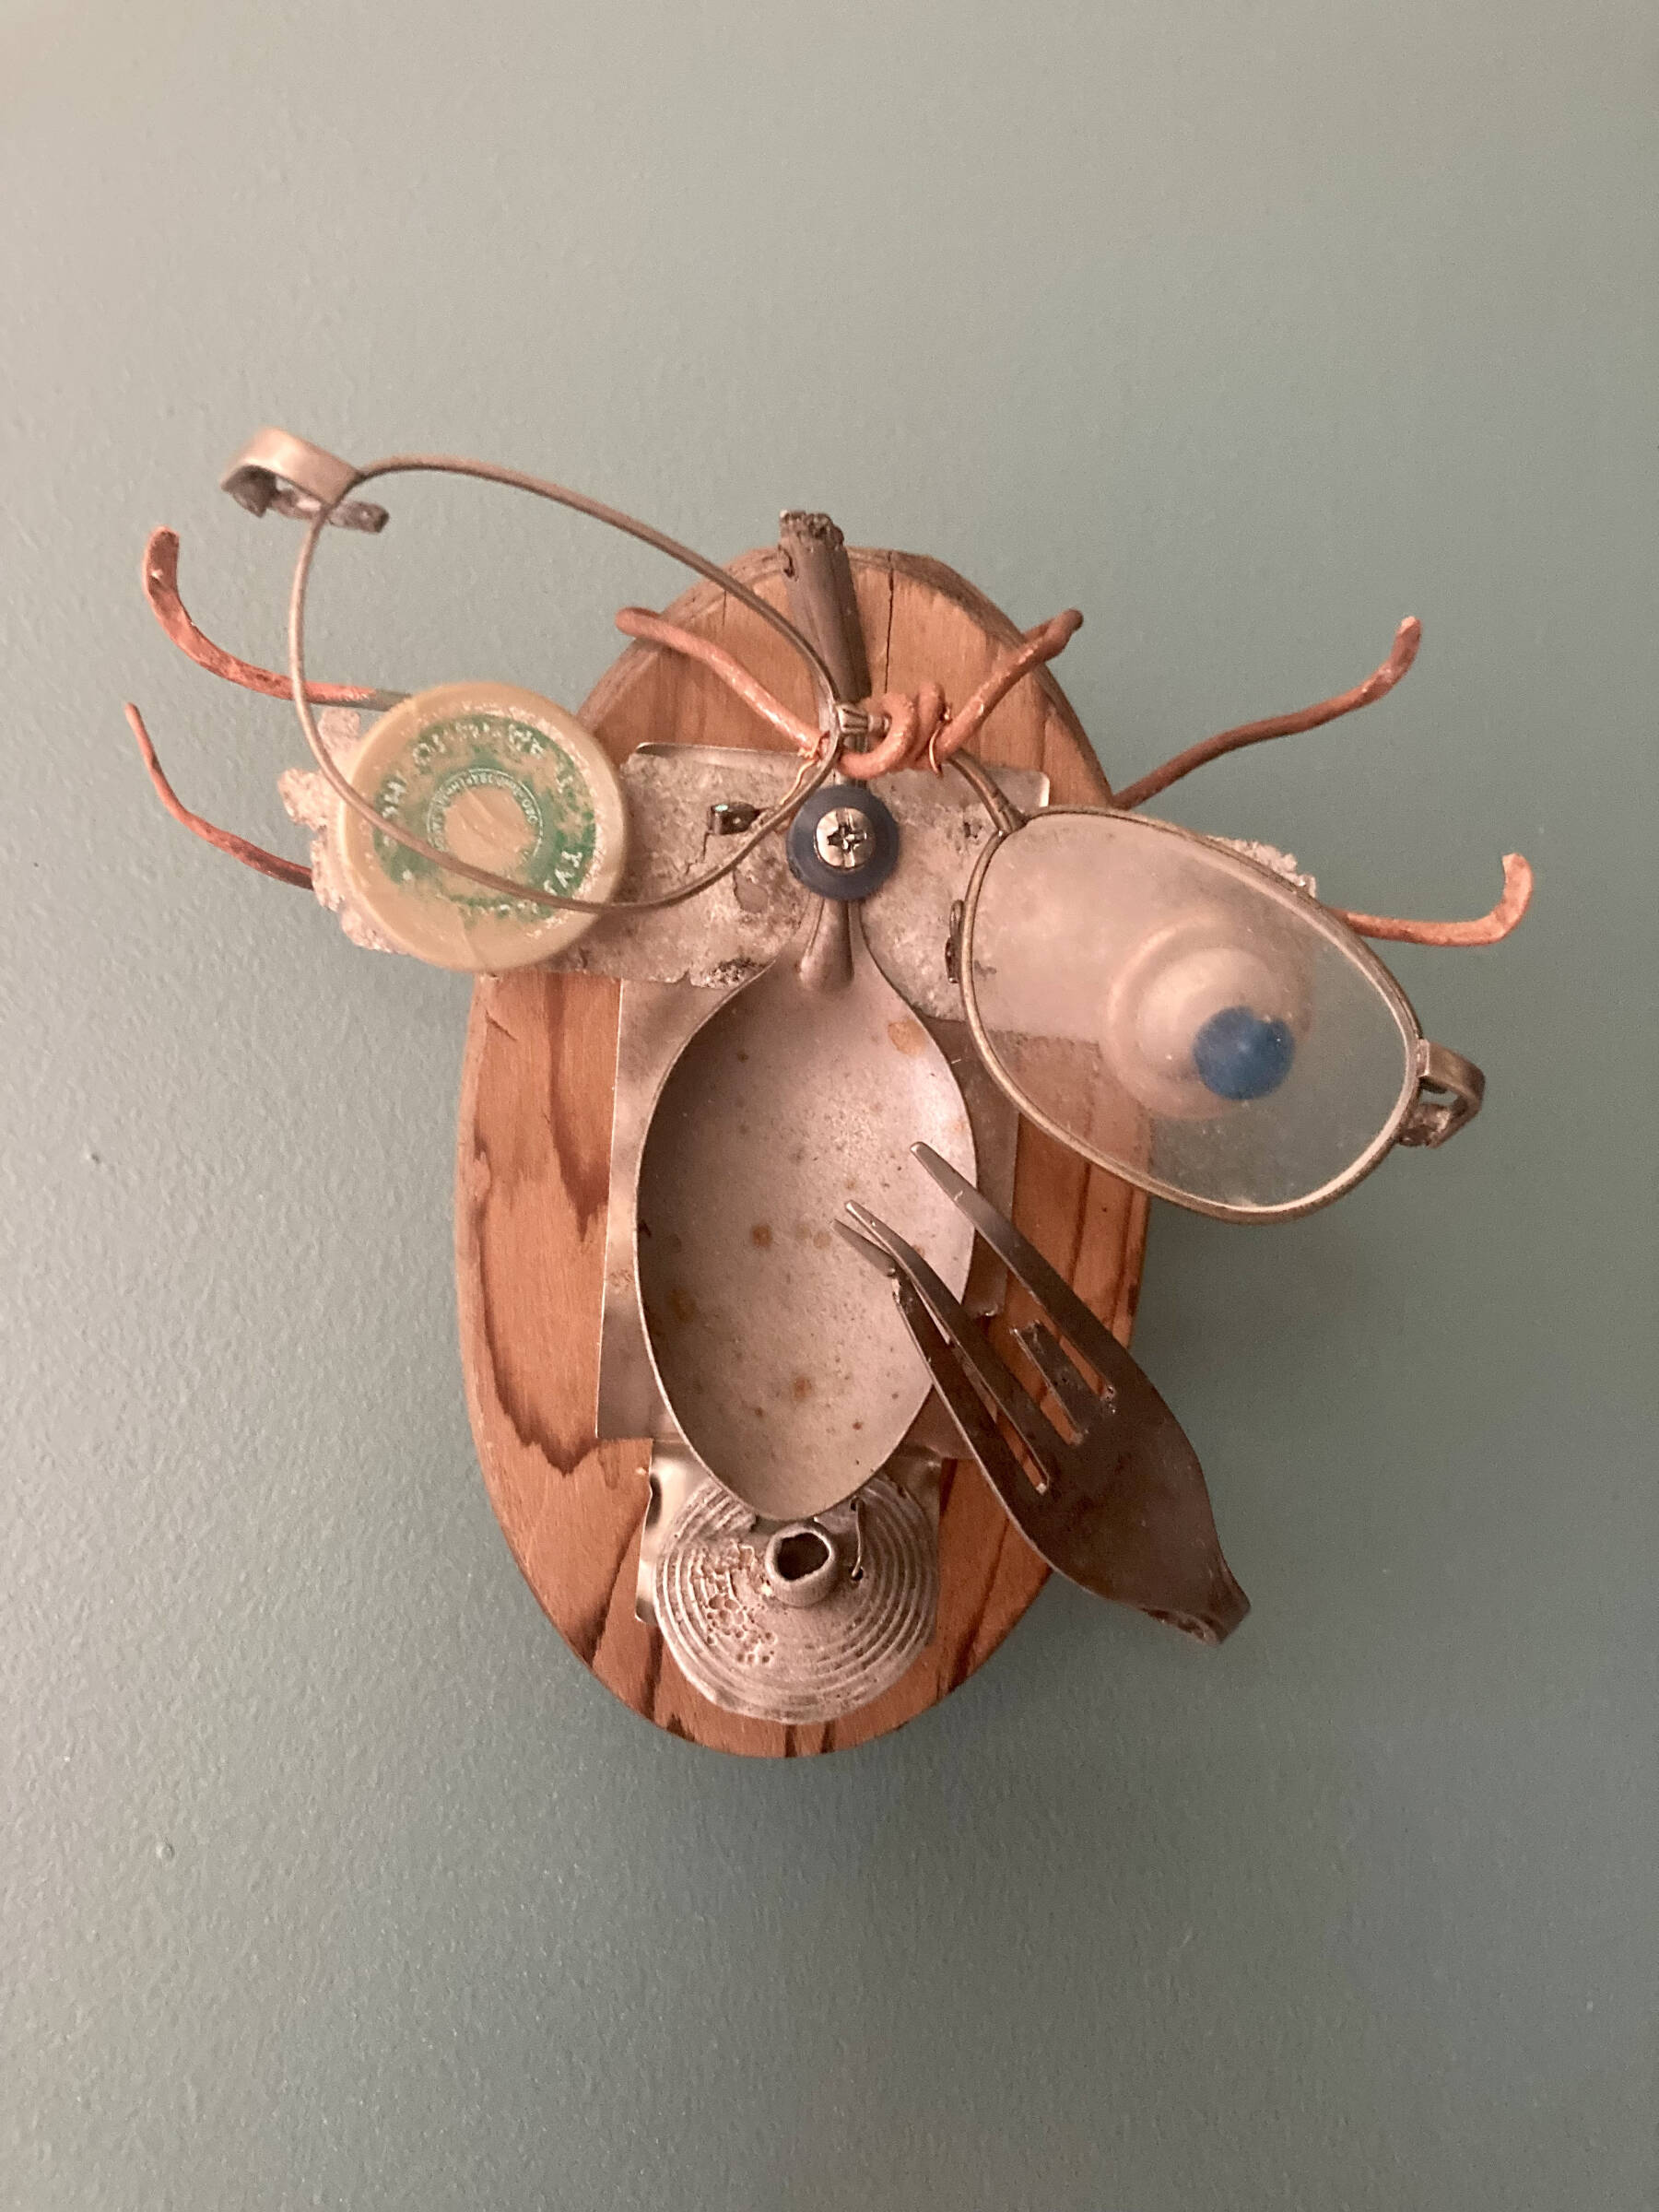 “Specific Gravity,” a found object sculpture by Michael Armstrong, is on display at Homer Council on the Arts’ “Fun With 5x7” exhibit through December. Photo provided by Homer Council on the Arts